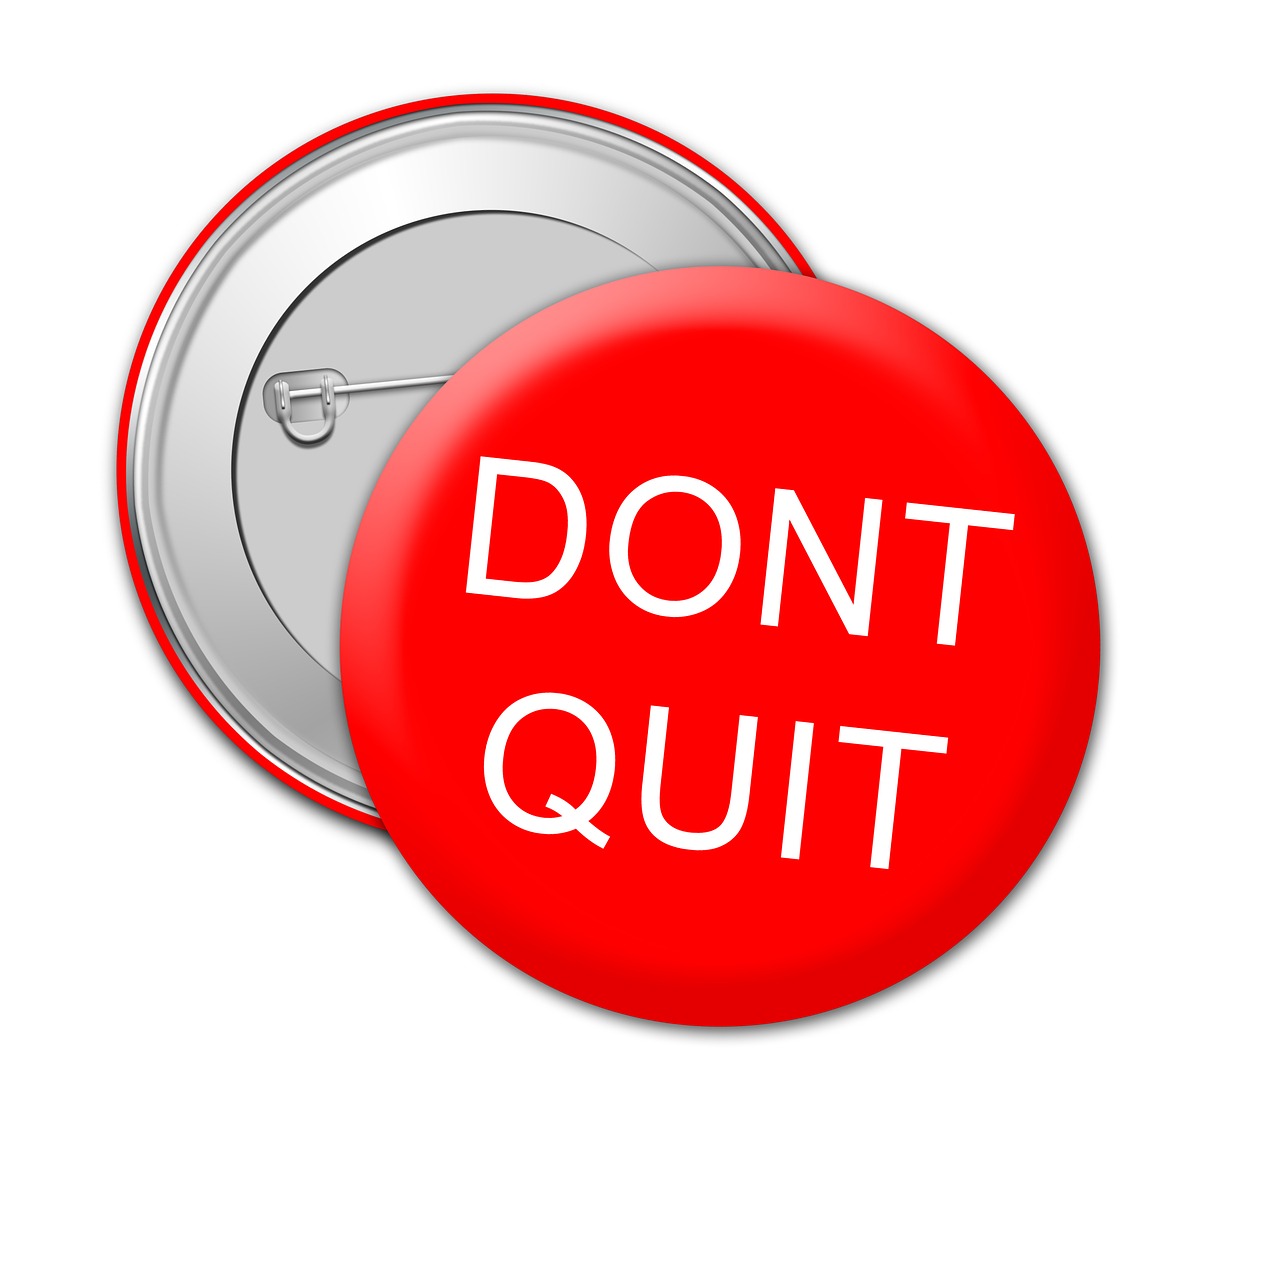 dont quit badge message free photo